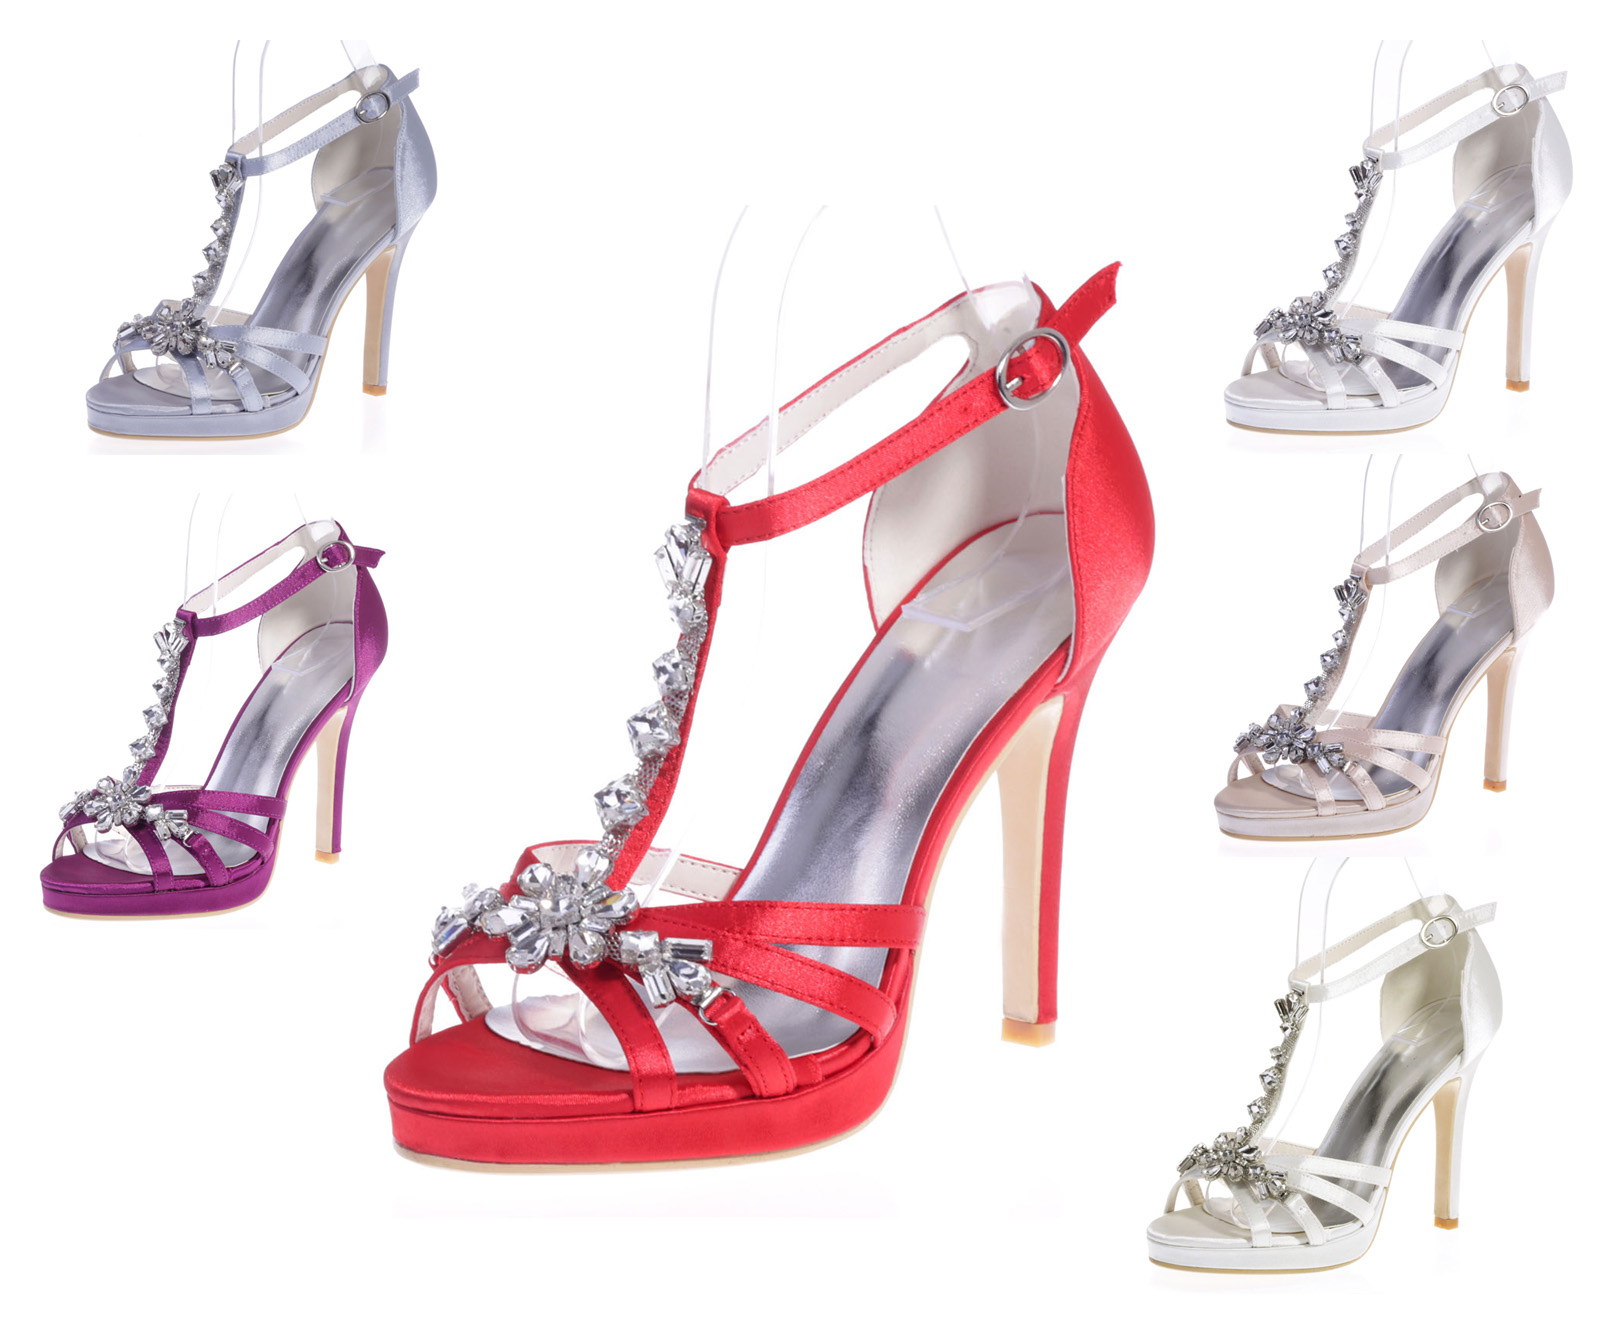 Fashion woman elegant crystal gem sandals stiletto ankle strap heels red purple white ivory champagne summer style shoes